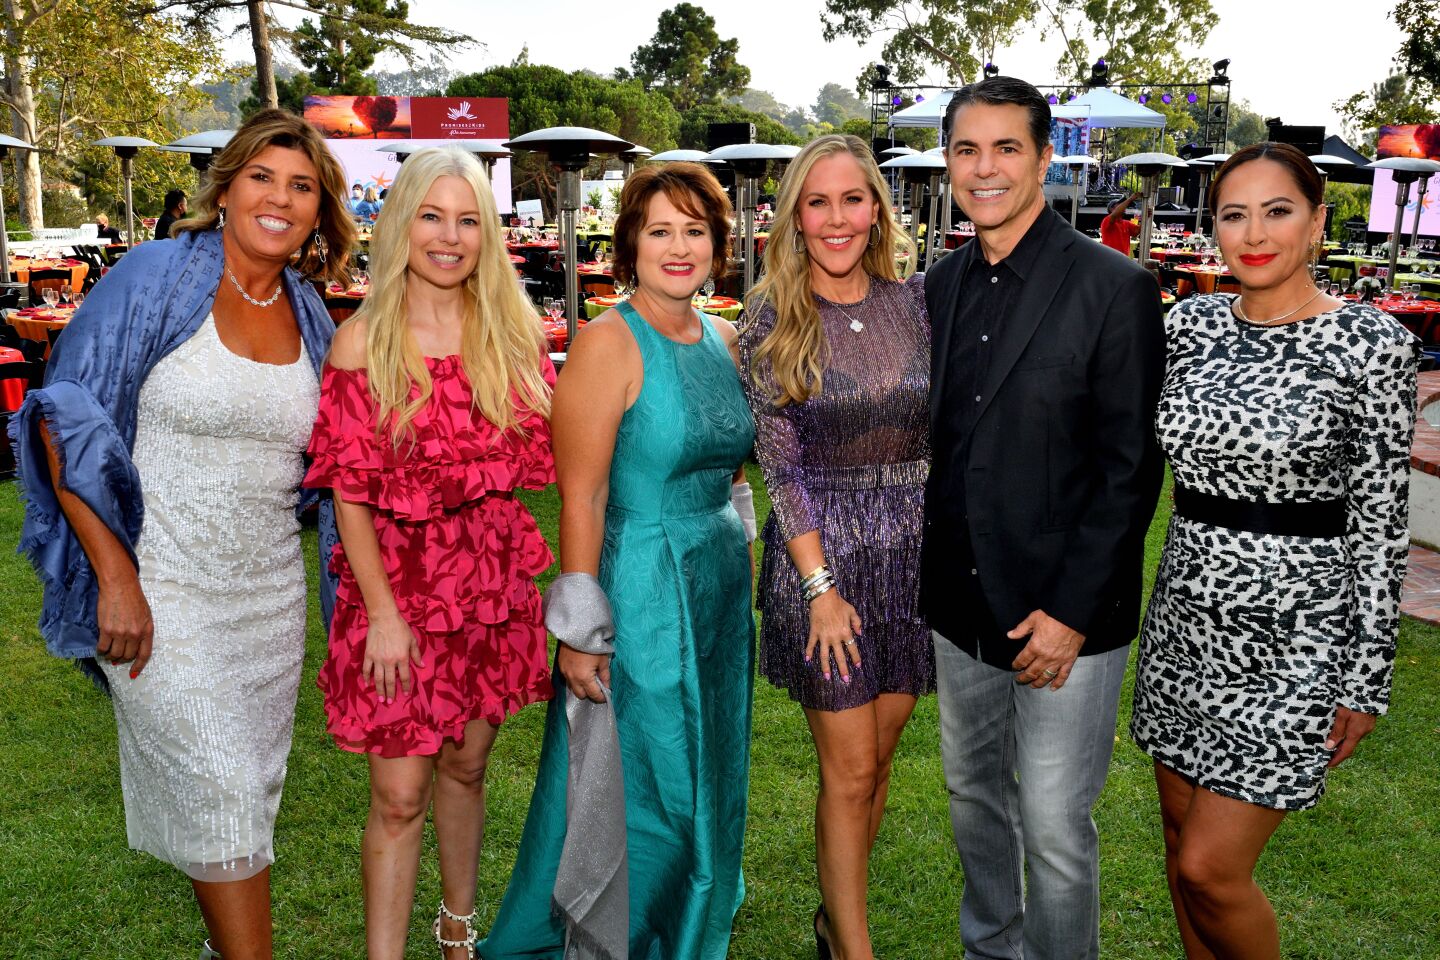 Event chairwomen Lisa Corbosiero and Jolene Perry, Promises2Kids Chief Executive Tonya Torosian, presenting sponsors Raegan and Kevin Prior and event chairwoman Vivianne Villanueva Dhupa attend Promises2Kids' Dream On Concert Gala on Sept. 13 at the Foxhill estate in La Jolla.